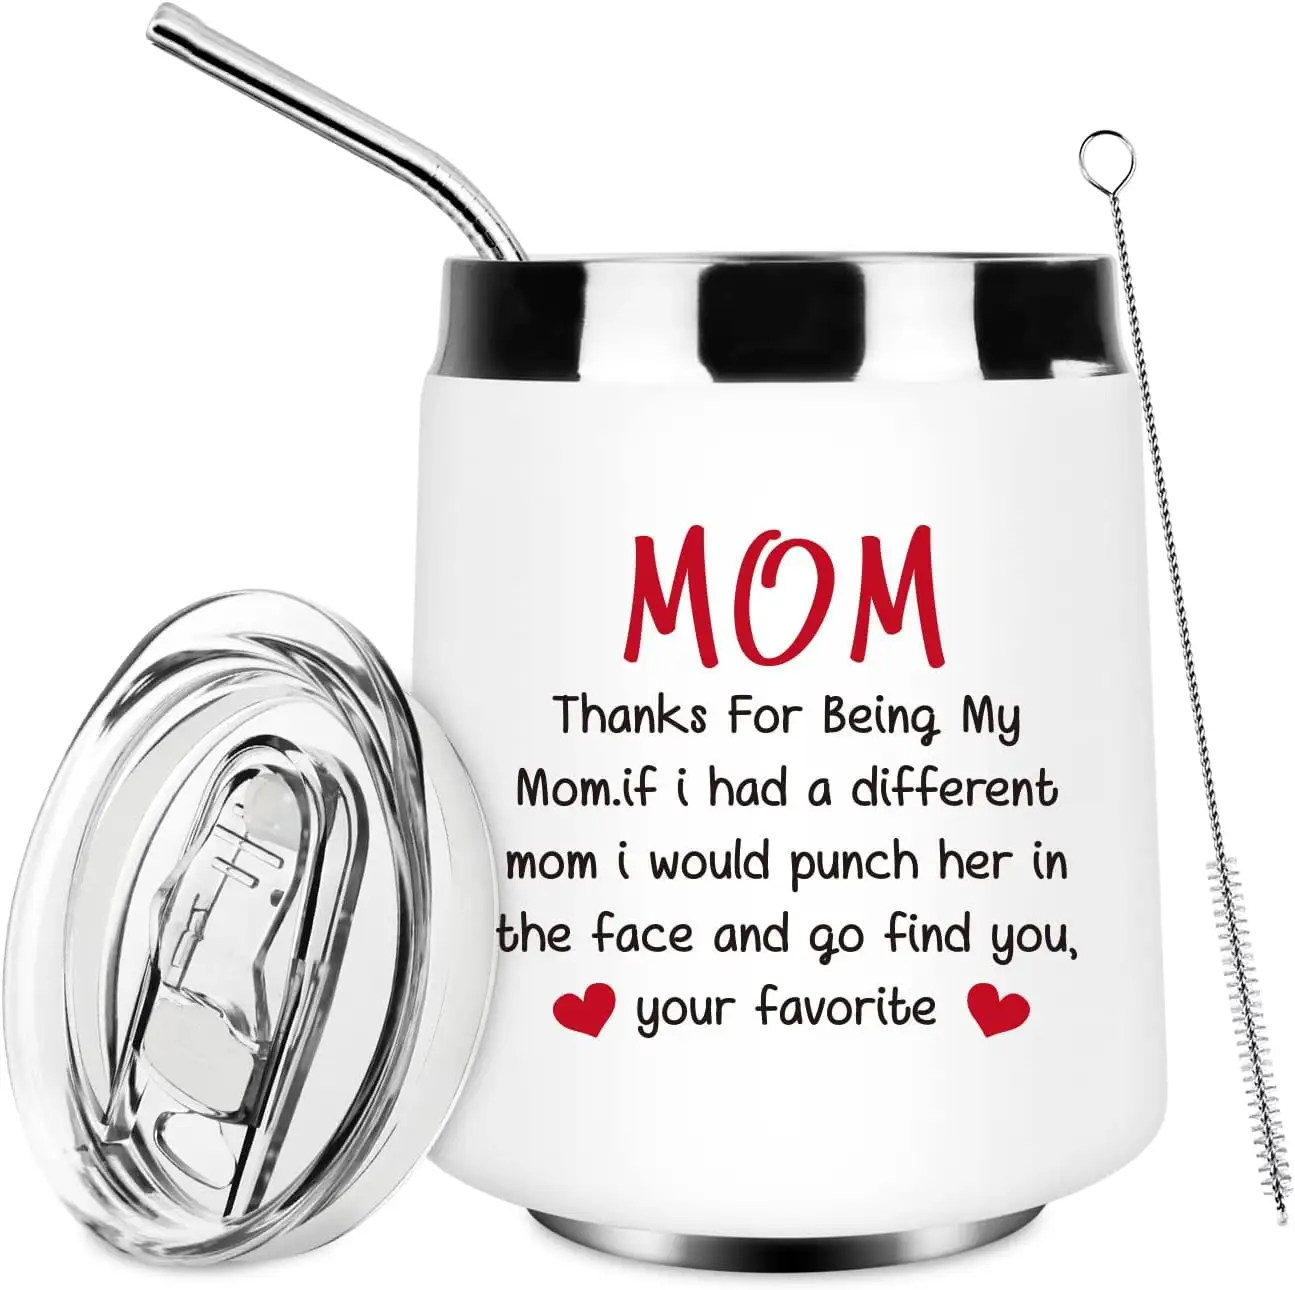 Best Mom Gifts Funny Mother Gift Mother's Day Birthday Christmas Gifts for Mom Grandma 12 oz Coffee Tumbler